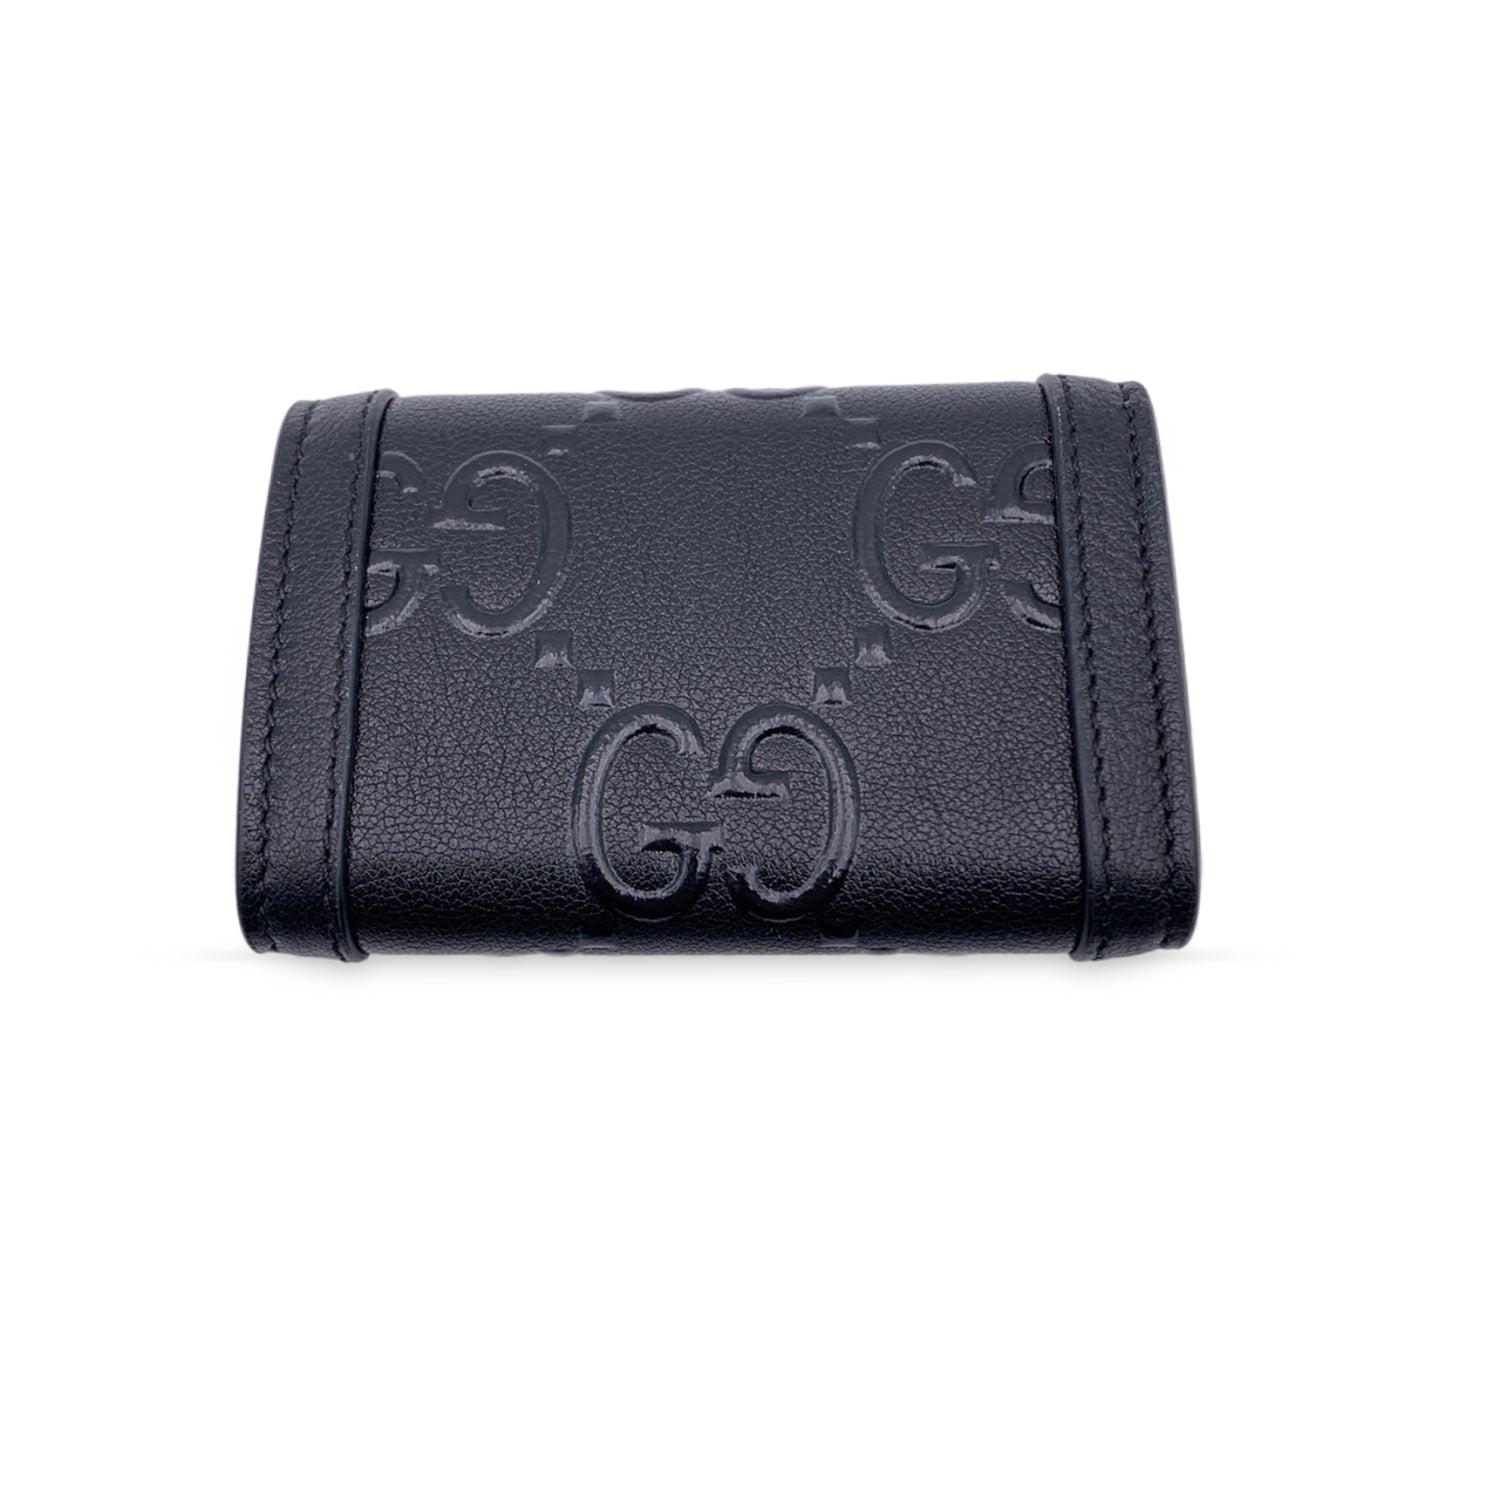 Gucci 'Wonka' Key case in black embossed monogram leather. Gold metal hardware. Snap closure on the front. Leather lining. 6 key rings inside. 'Gucci - Made in Italy' embossed inside. Retail price is 410 Euros

Details

MATERIAL: Leather

COLOR: